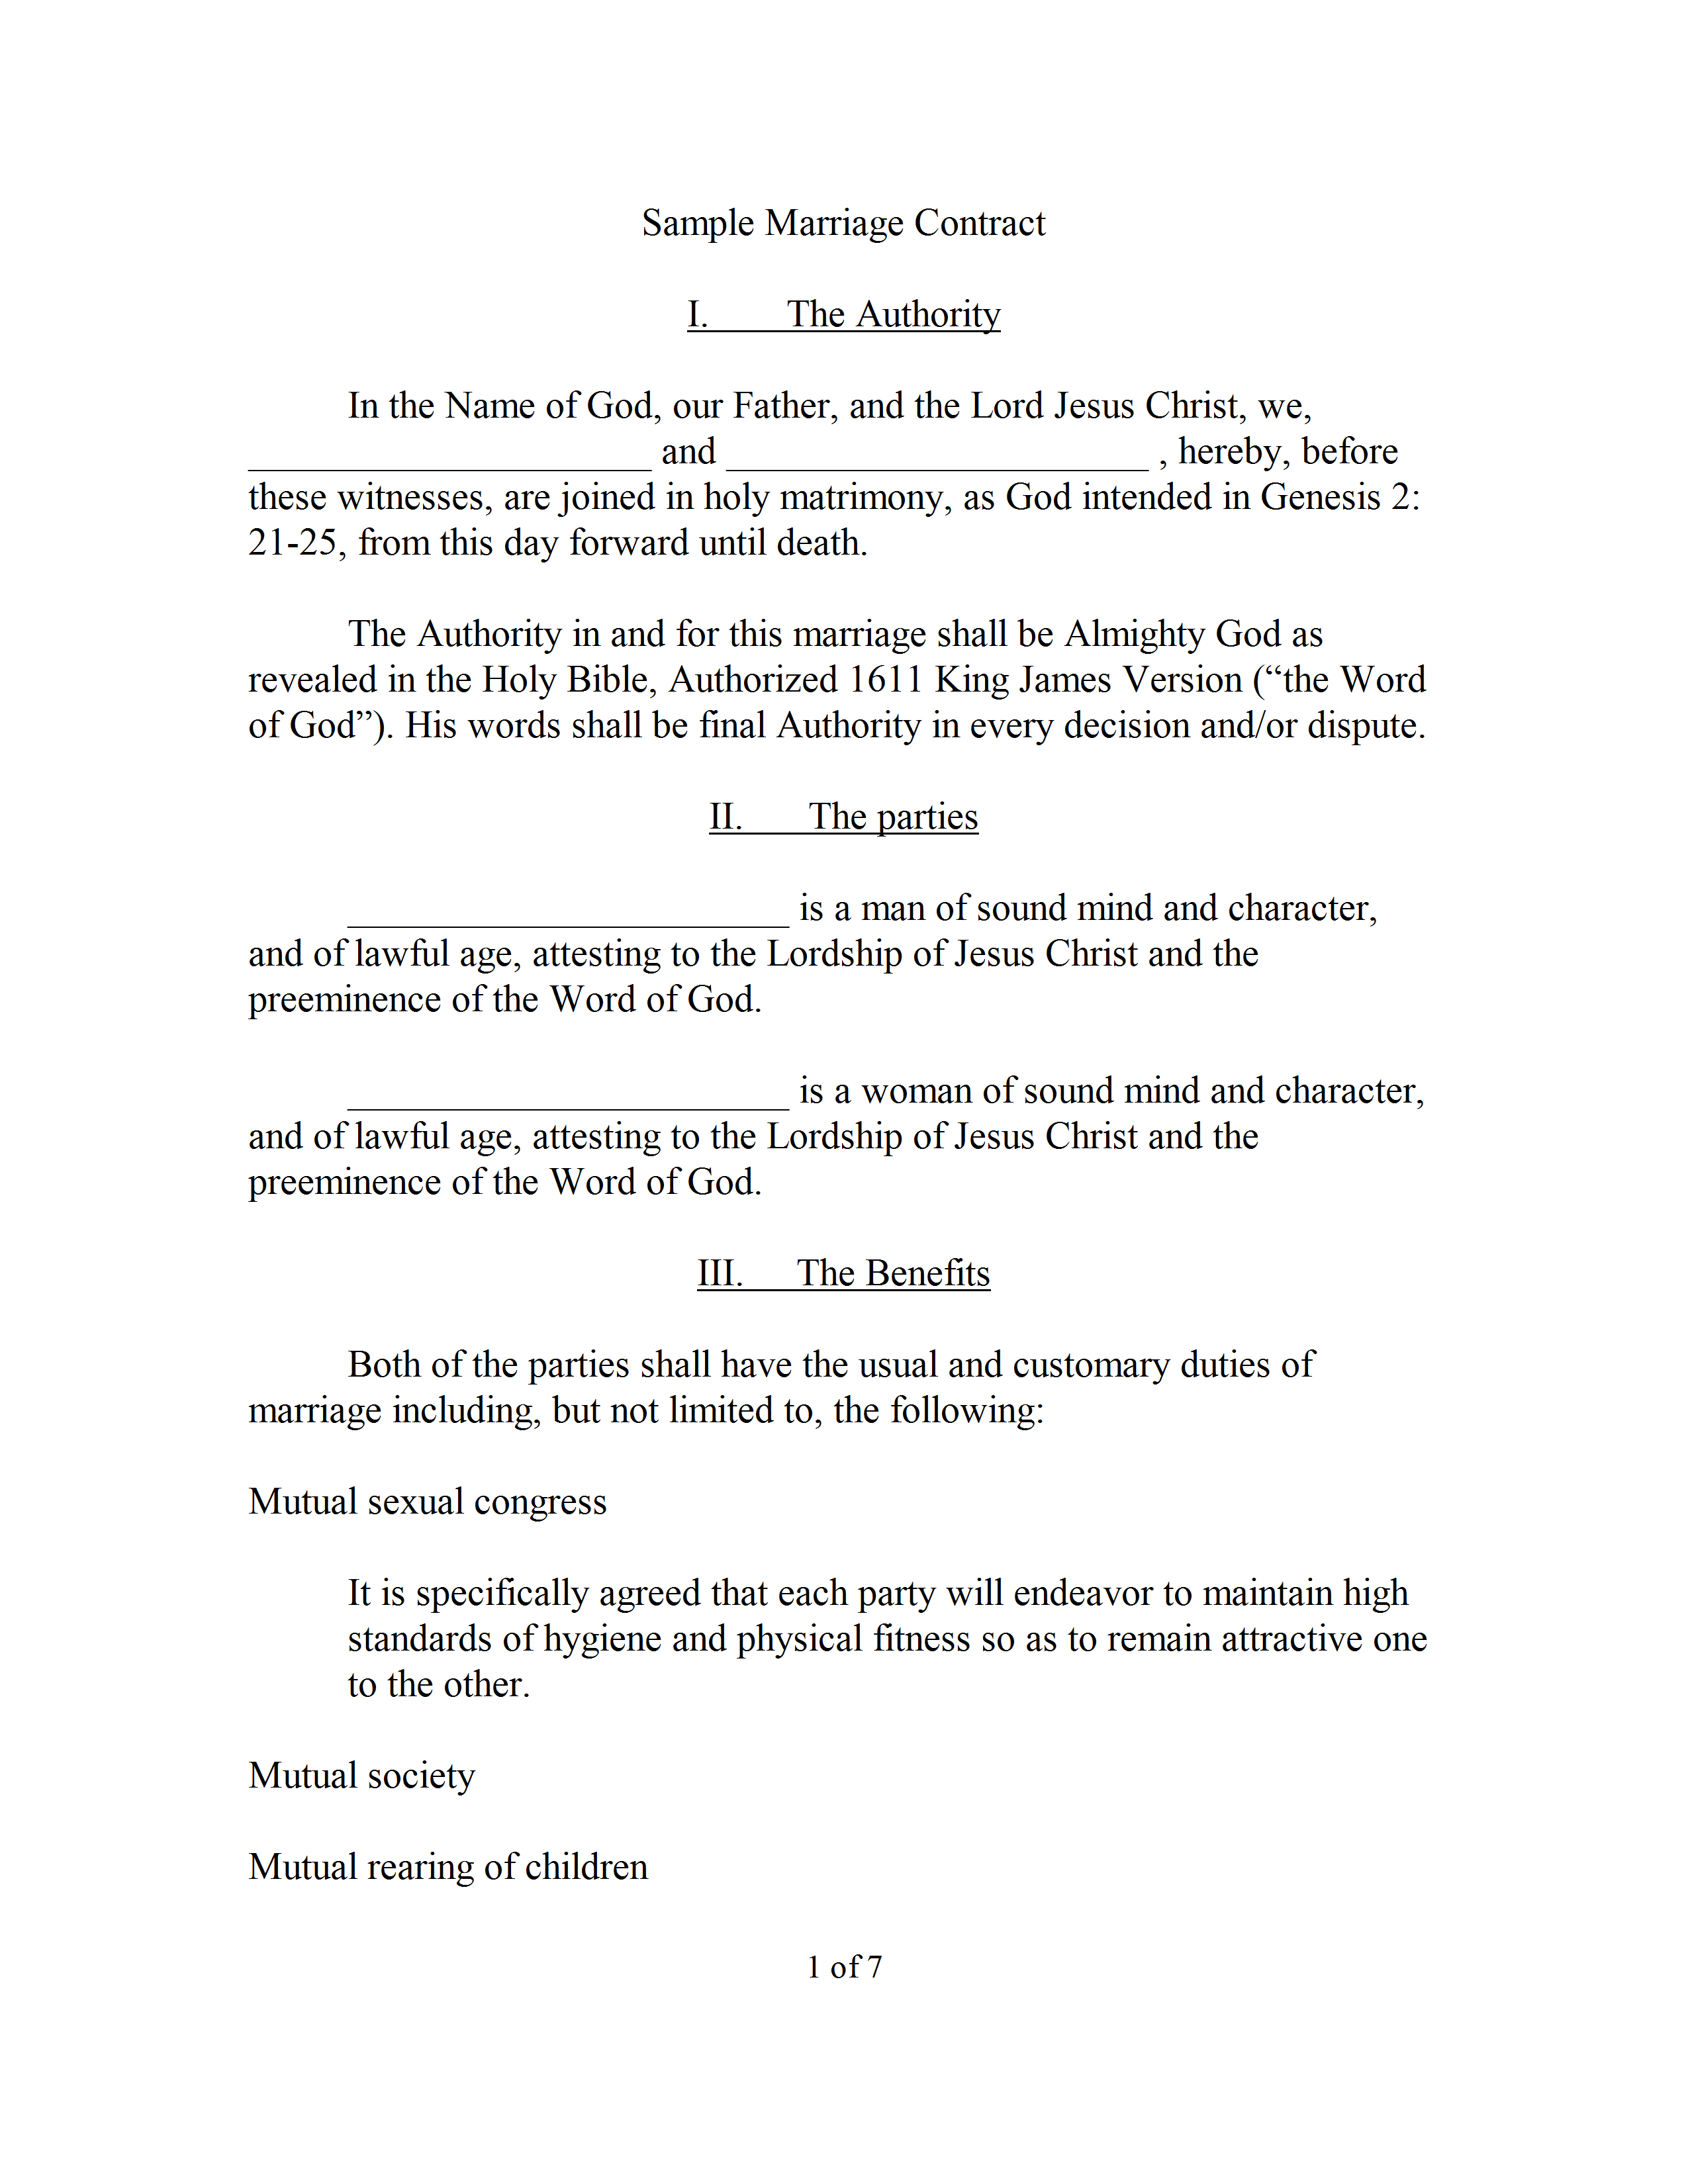 Marriage Contract Sample in Microsoft Word